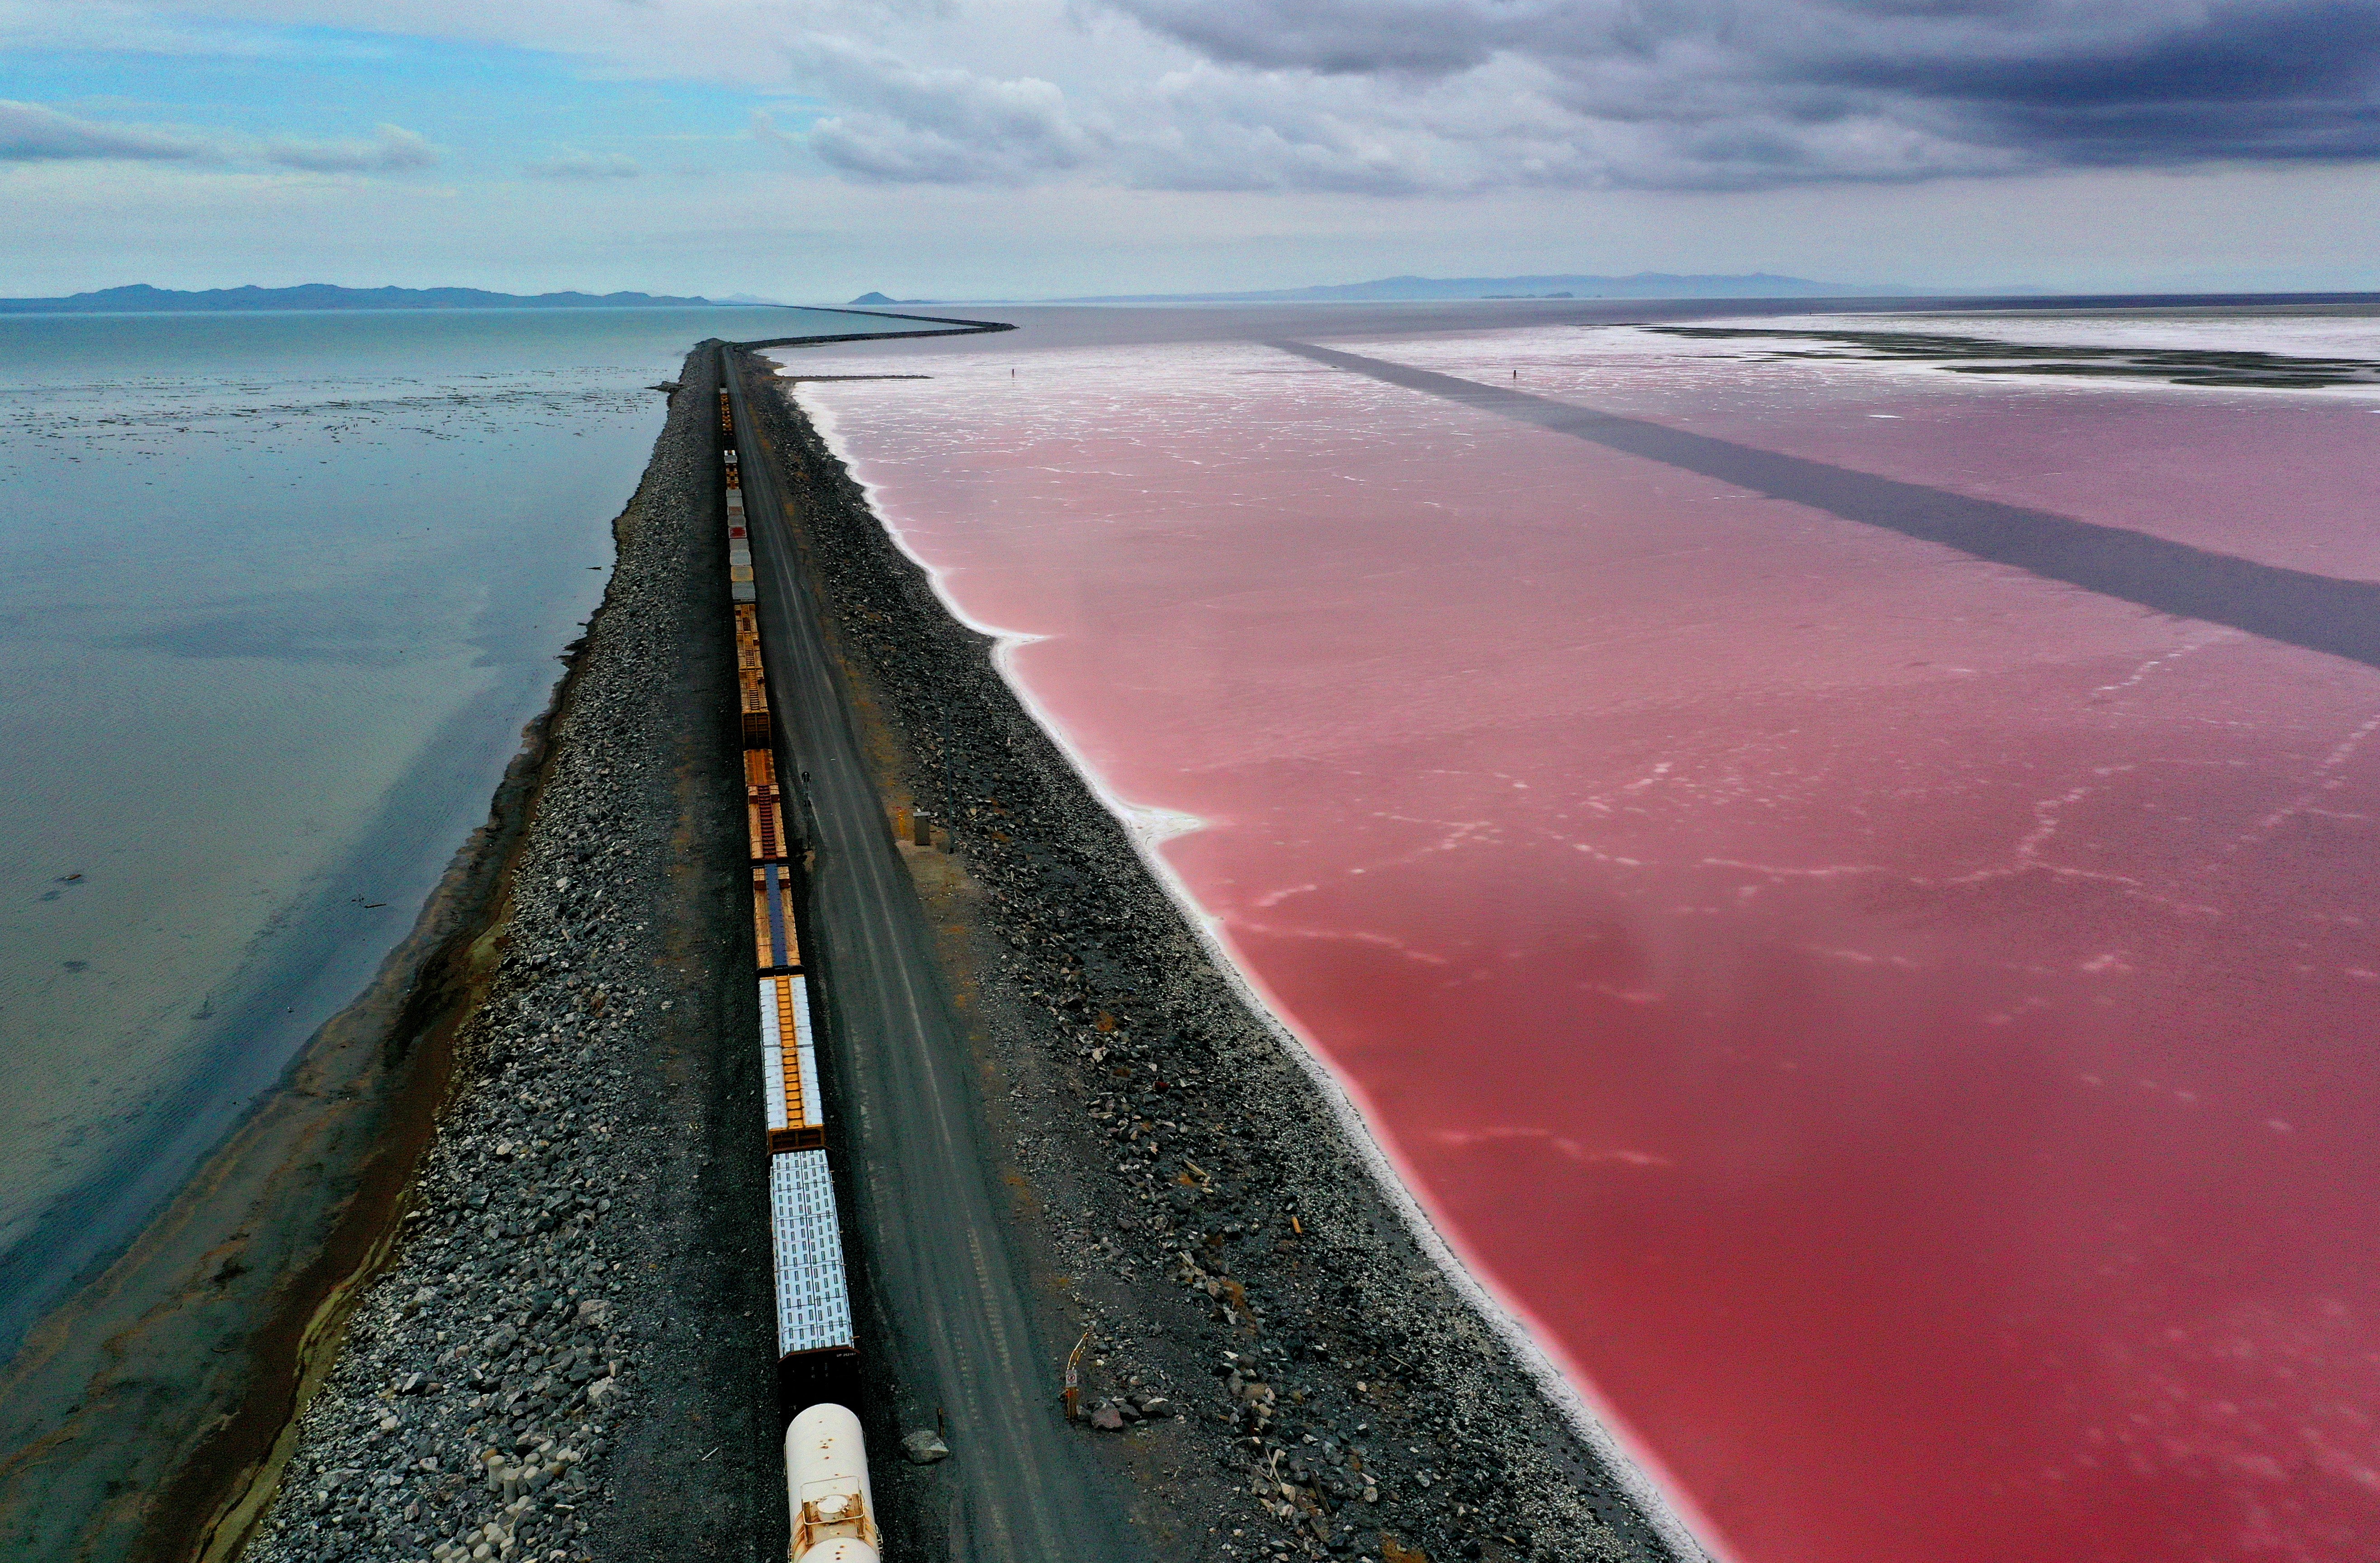 A railroad causeway divides the Great Salt Lake in August 2021 near Corinne, Utah. As severe drought continues to take hold in the western United States, water levels at the Great Salt Lake, the largest saltwater lake in the Western Hemisphere, have dropped to the lowest levels ever recorded